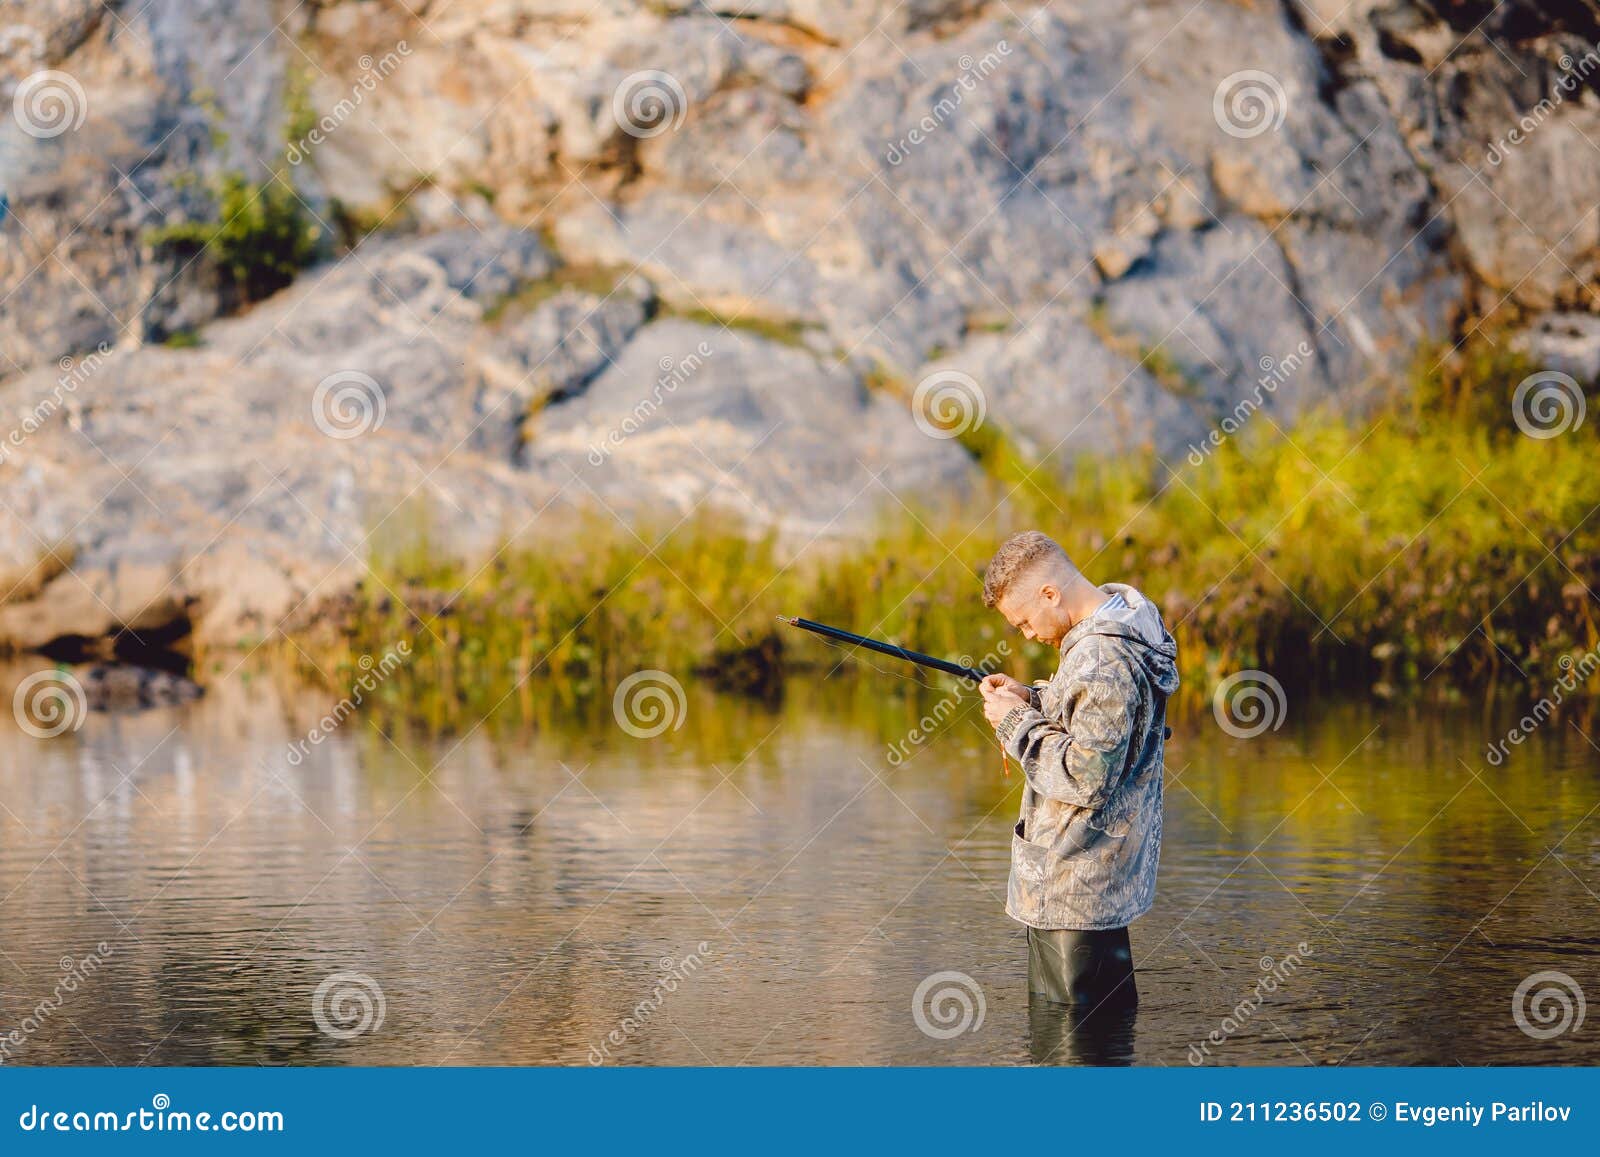 2,130 Tangled Fishing Line Images, Stock Photos, 3D objects